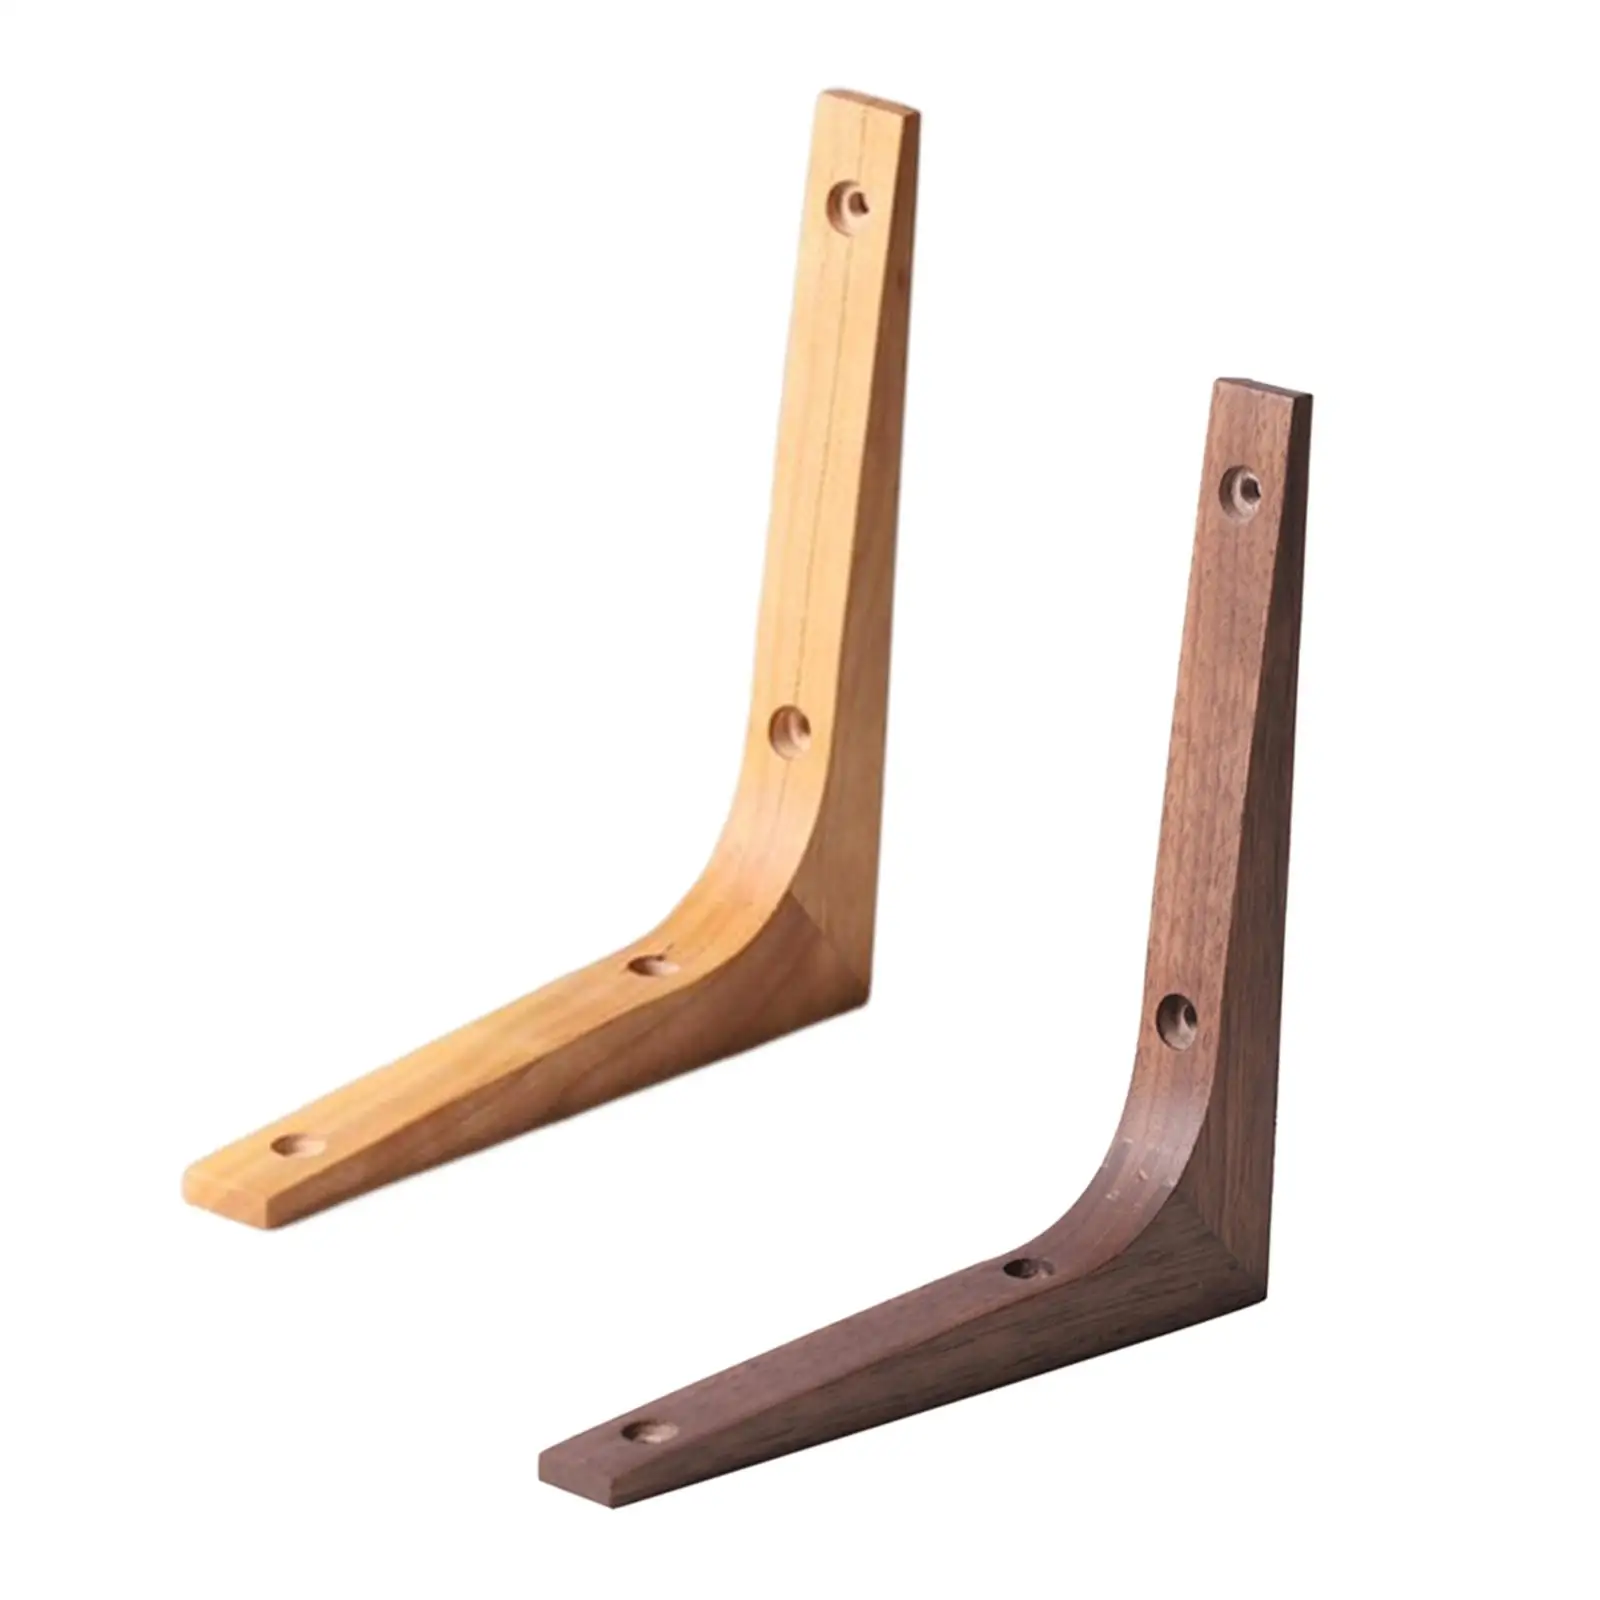 Solid Wood Triangle Selves Bracket Corner Brace Shelf Supports 90 Degree Wall Mounted L Shaped Shelving Brackets for Home Decor